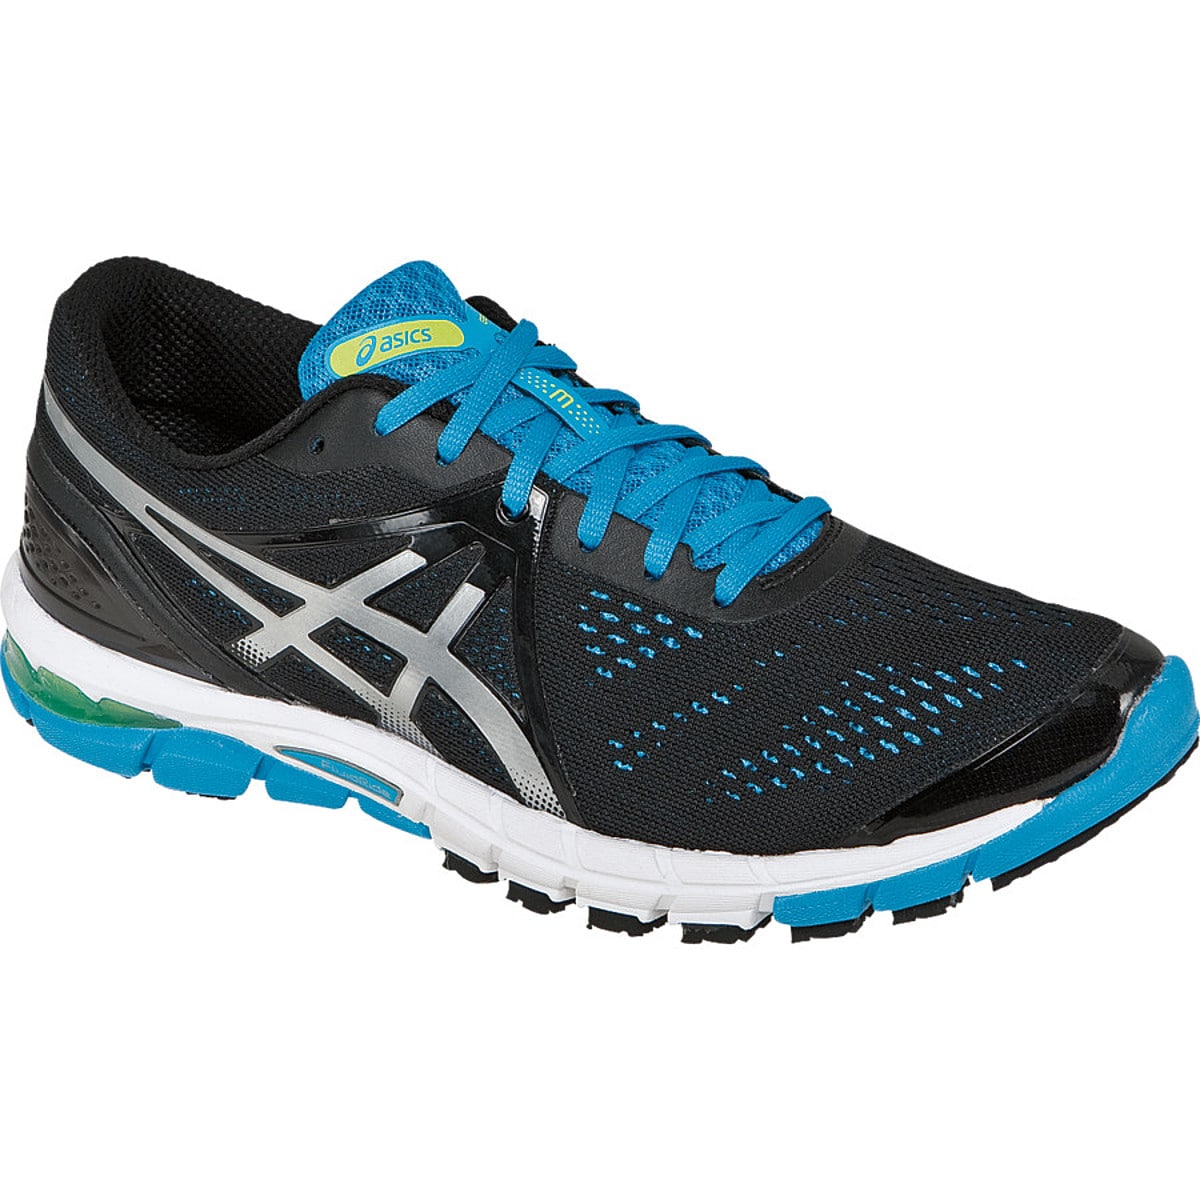 study Steward See insects Asics Gel-Excel33 3 Running Shoe - Men's - Footwear